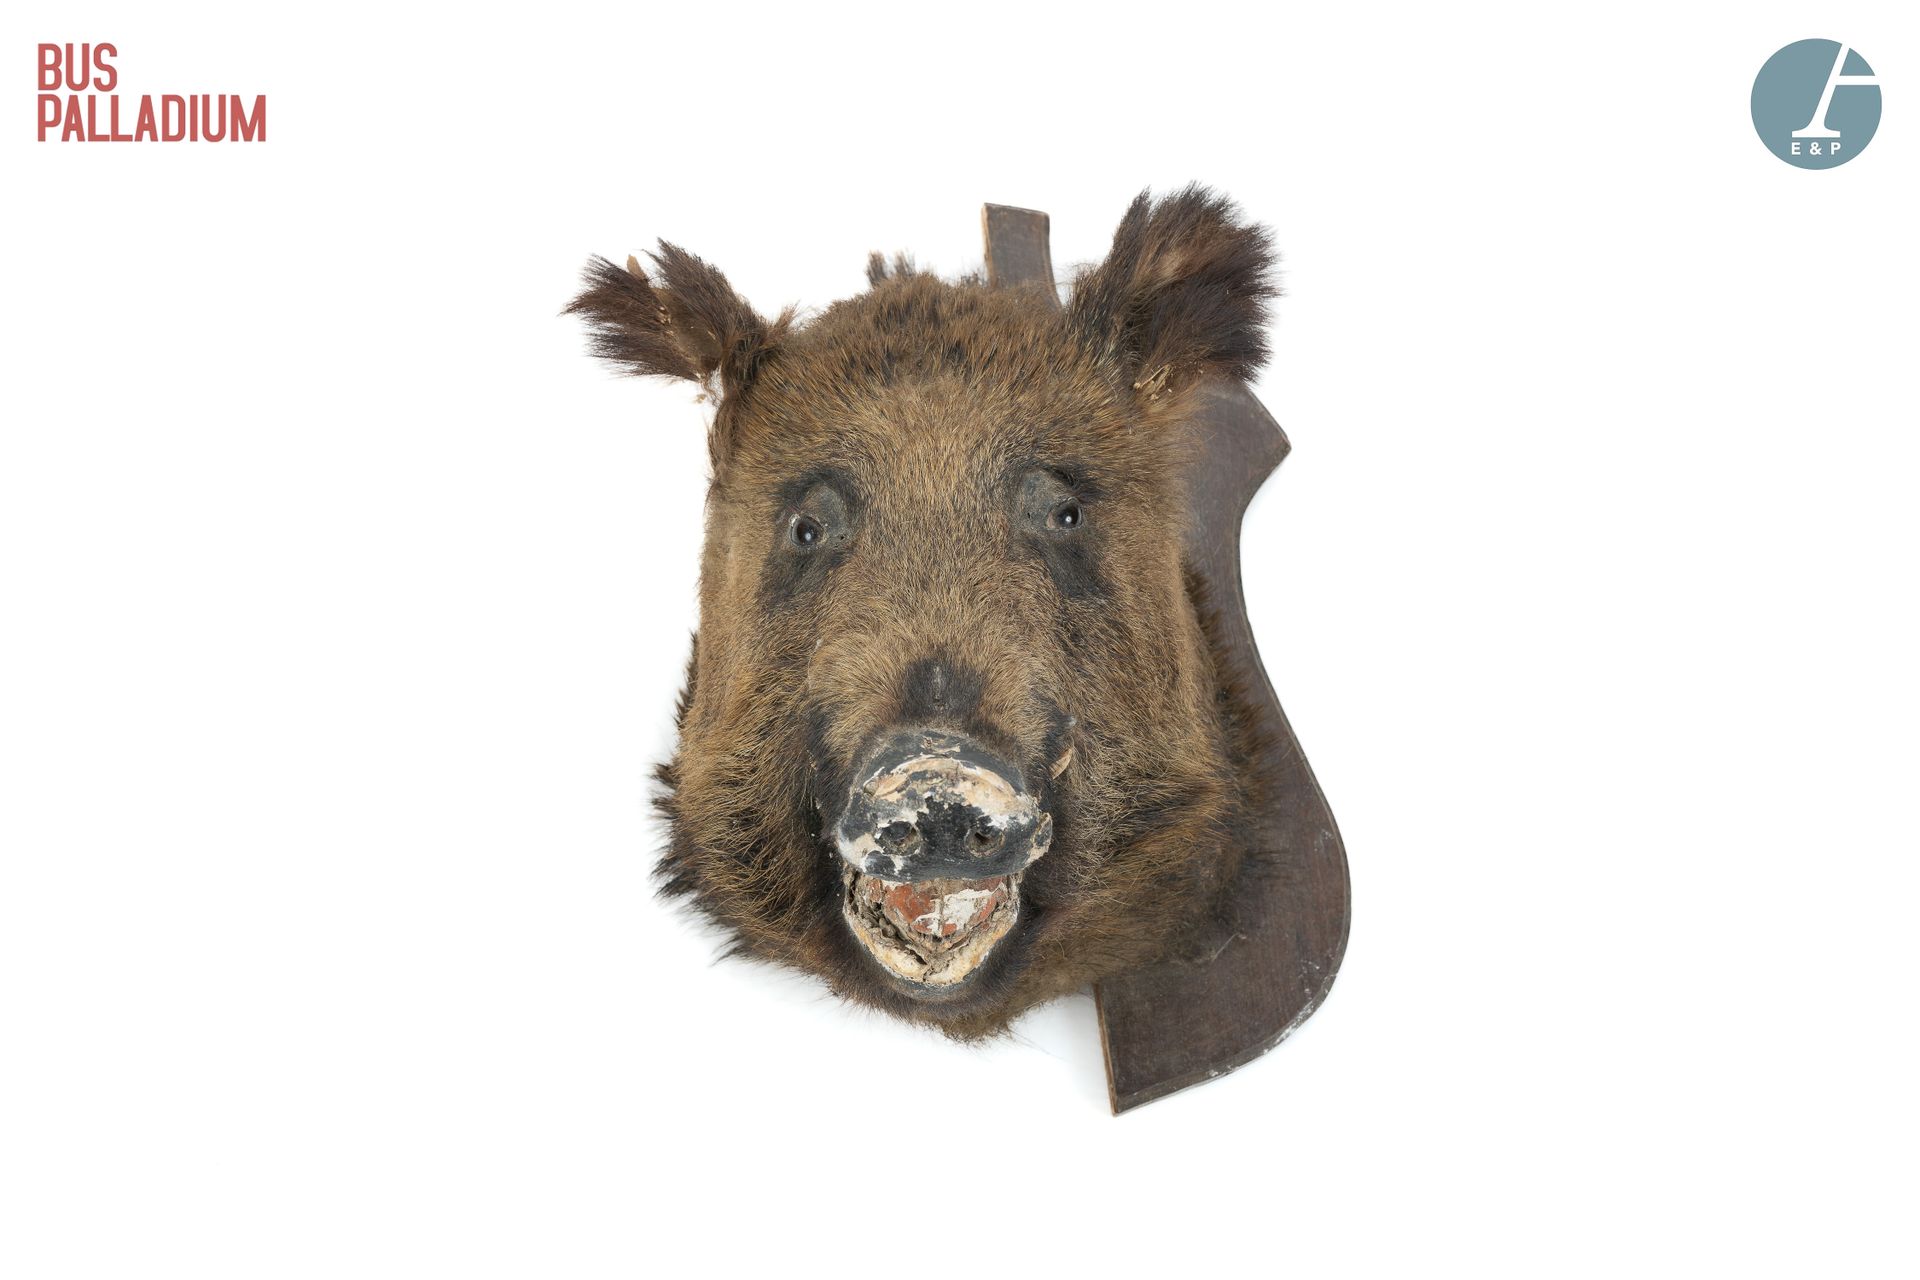 Null From the Bus Palladium concert hall



Naturalized boar's head.



H: 66cm &hellip;